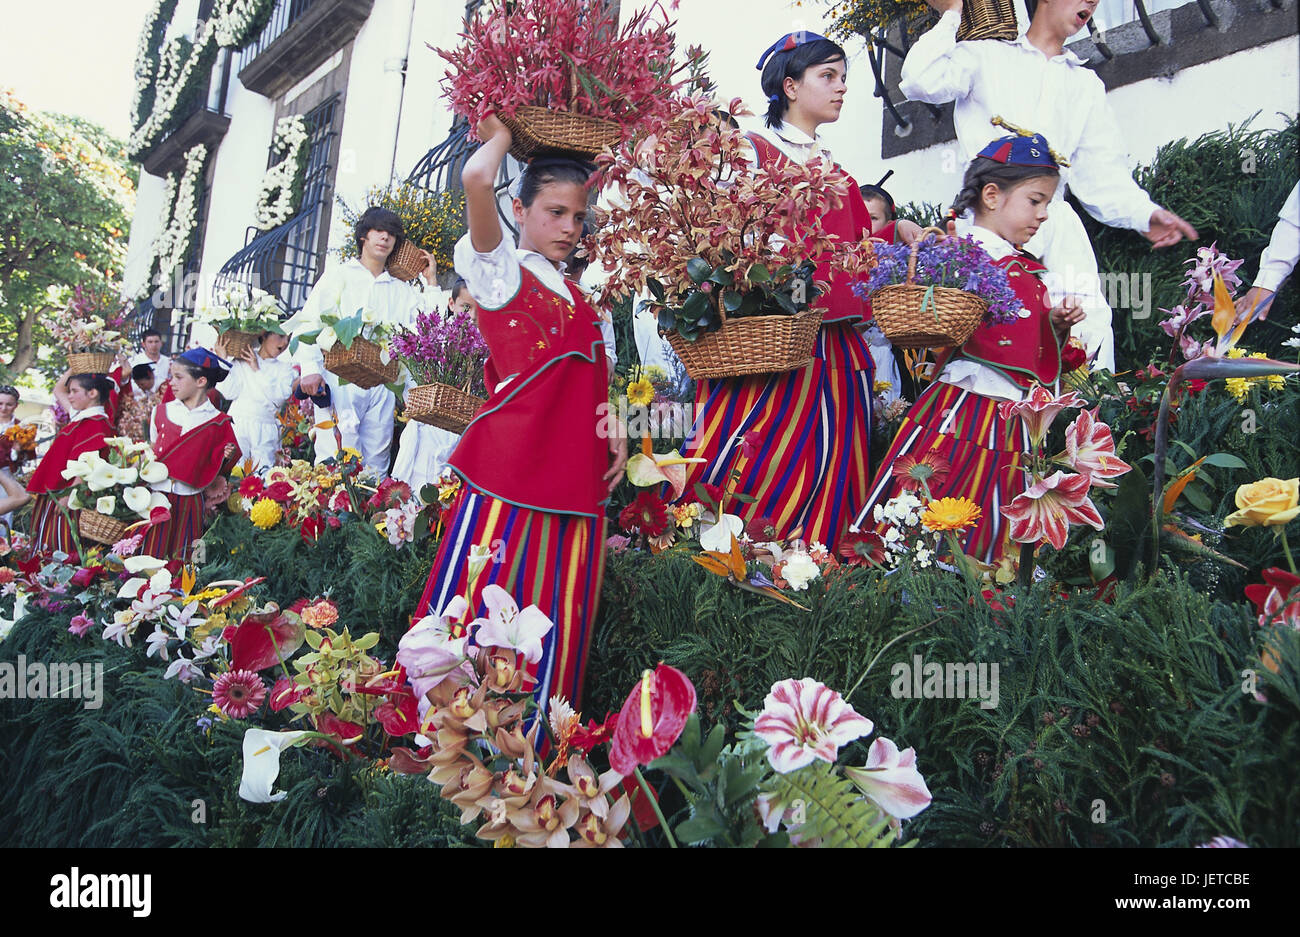 Portugal, island Madeira, Funchal, Festa there Flor, women, costumes, flower jewellery, island capital, flower feast, flower save, save, fixed carriage, person, clothes, folklore clothes, flowers, blossoms, attraction, place of interest, destination, tourism, Stock Photo